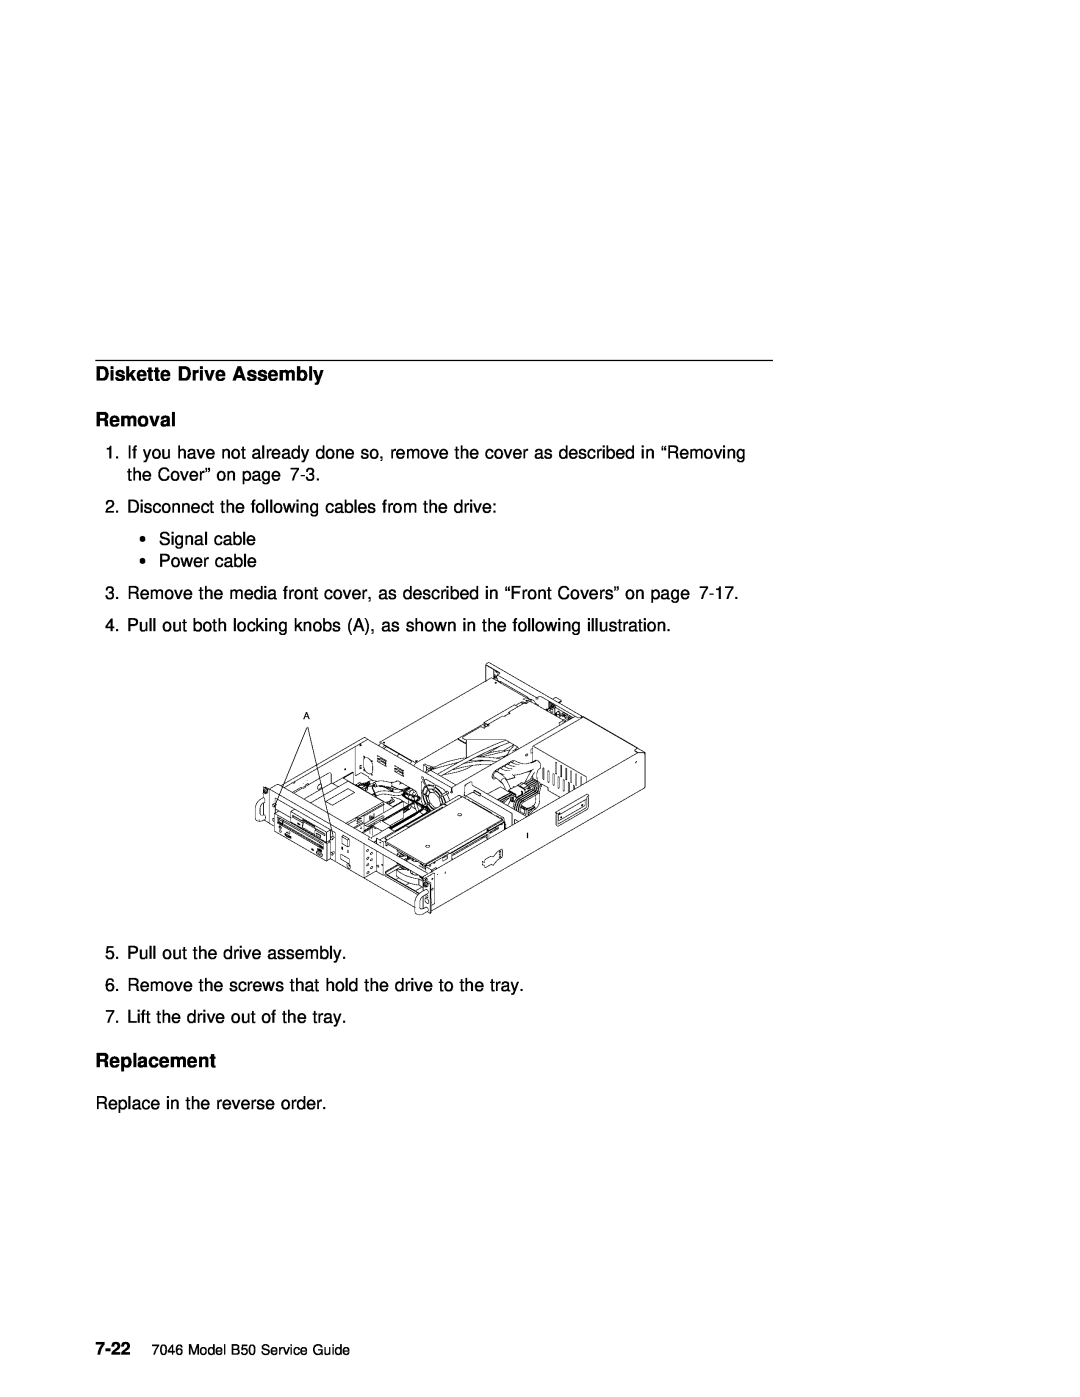 IBM manual Diskette Drive Assembly Removal, Replacement, 7-22 7046 Model B50 Service Guide 